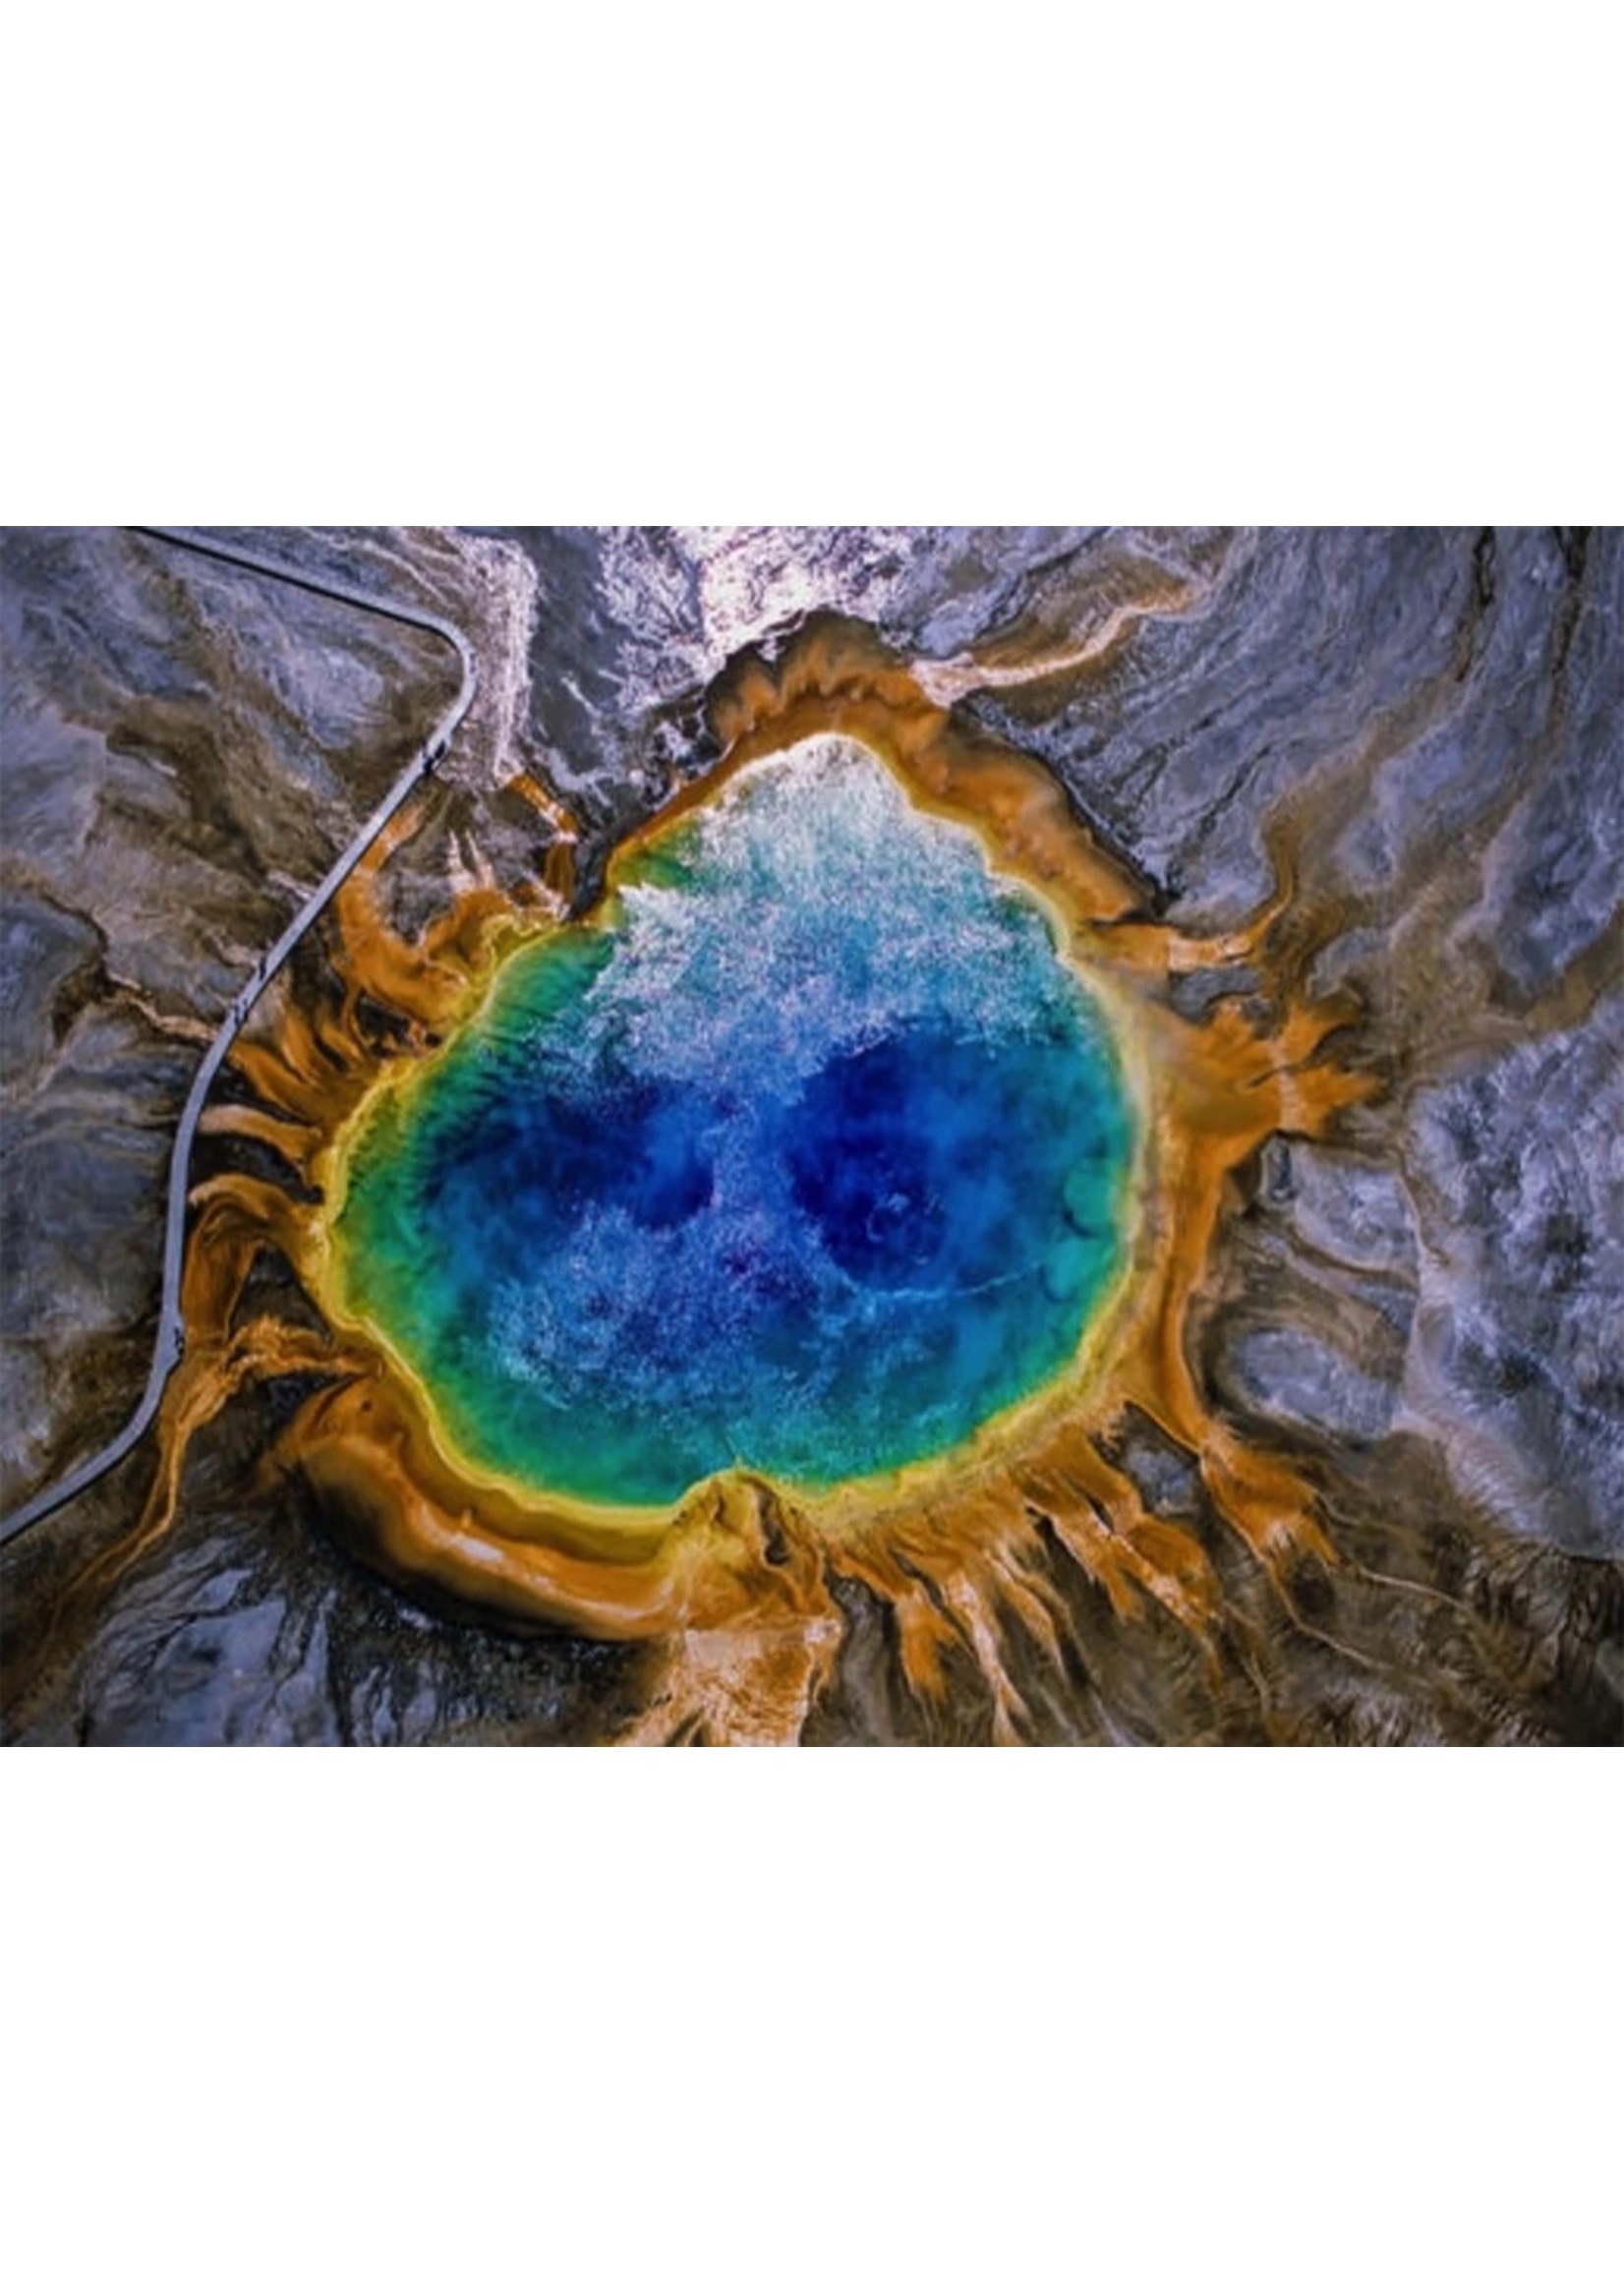 New York Puzzle Co Grand Prismatic Spring - 1000 Piece Puzzle